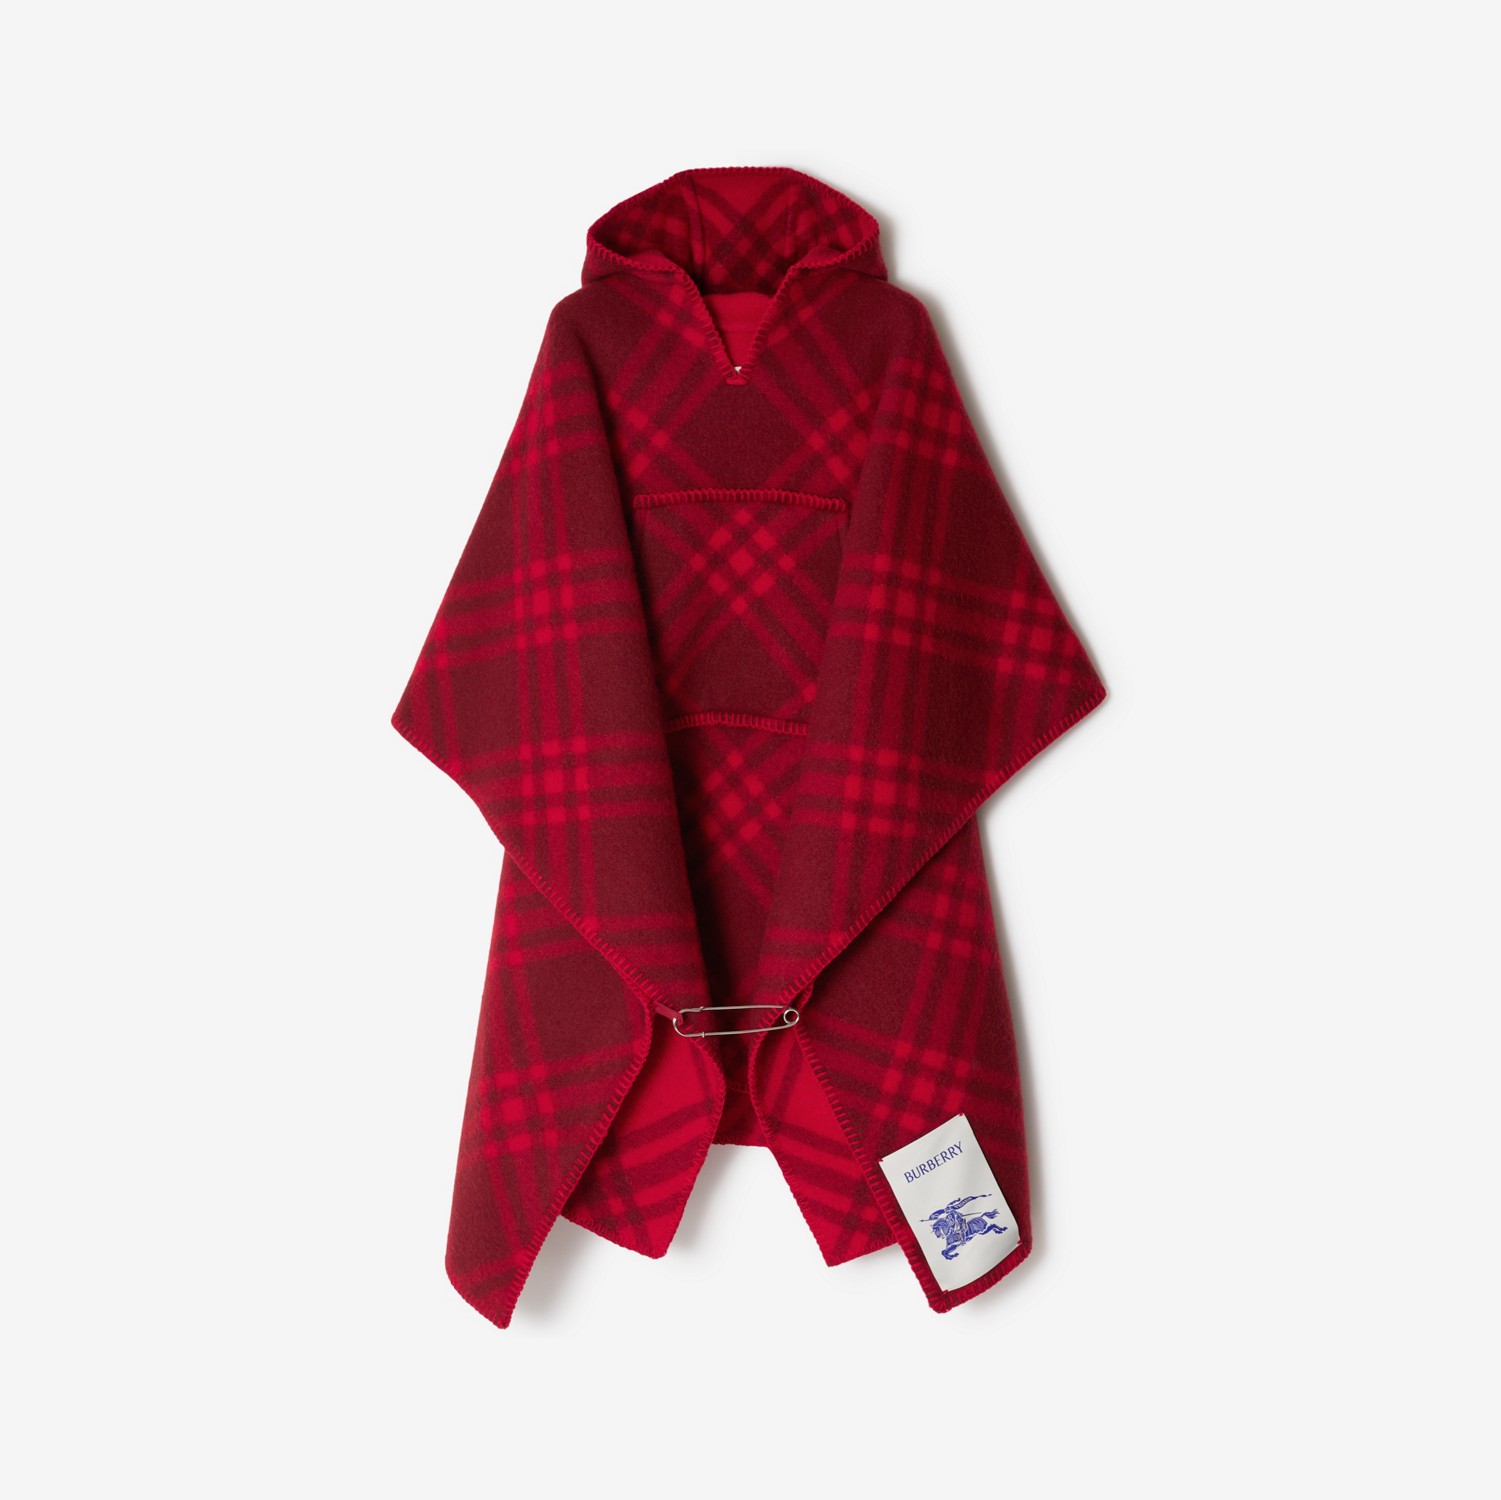 Cape-Decke aus Wolle mit Karomuster (Ripple) | Burberry®